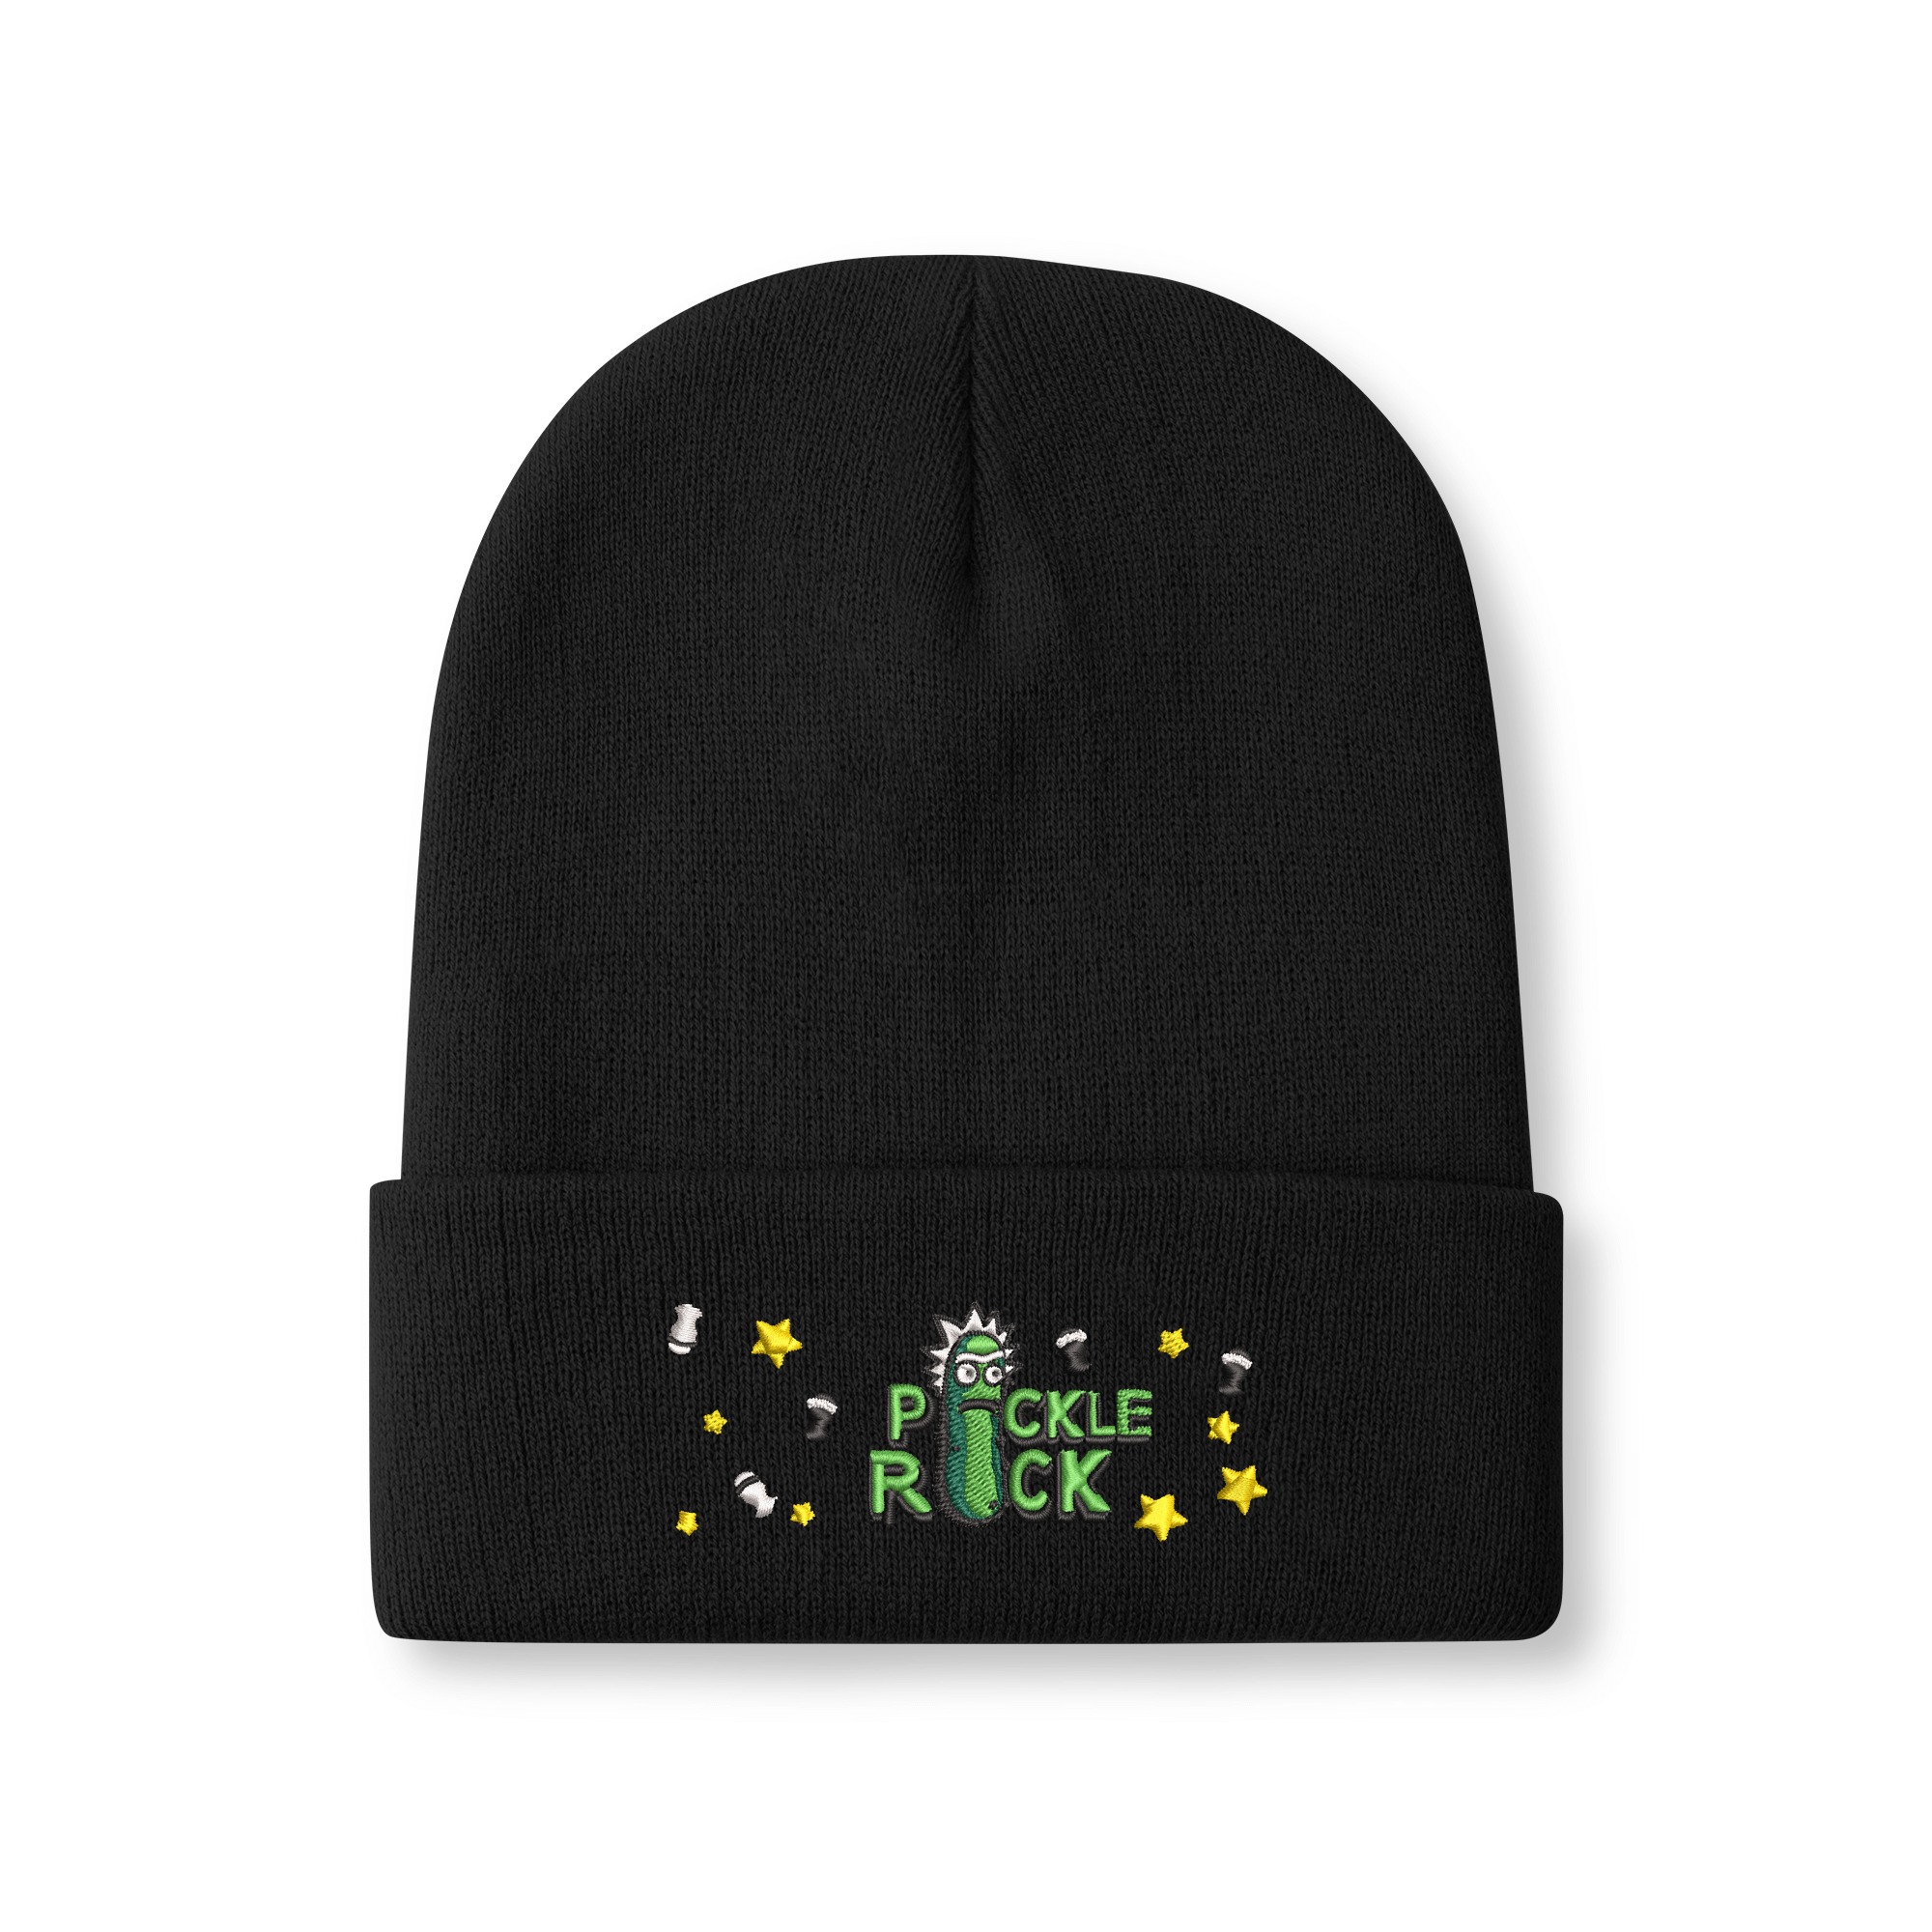 Pickle Rick Knit Beanies